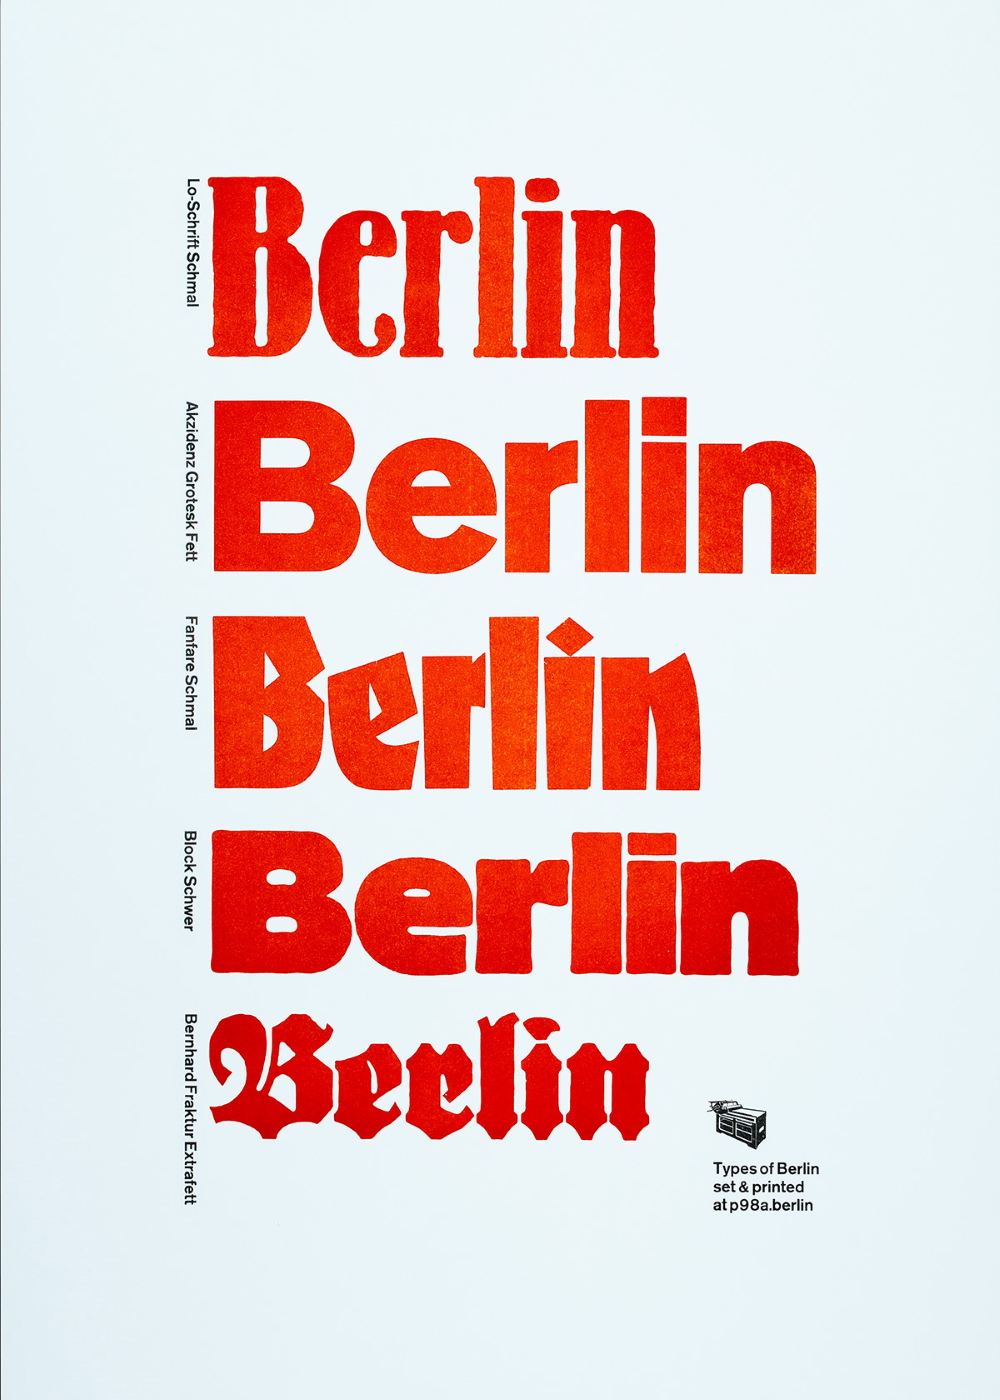 Berlin-poster-print showing various typefaces